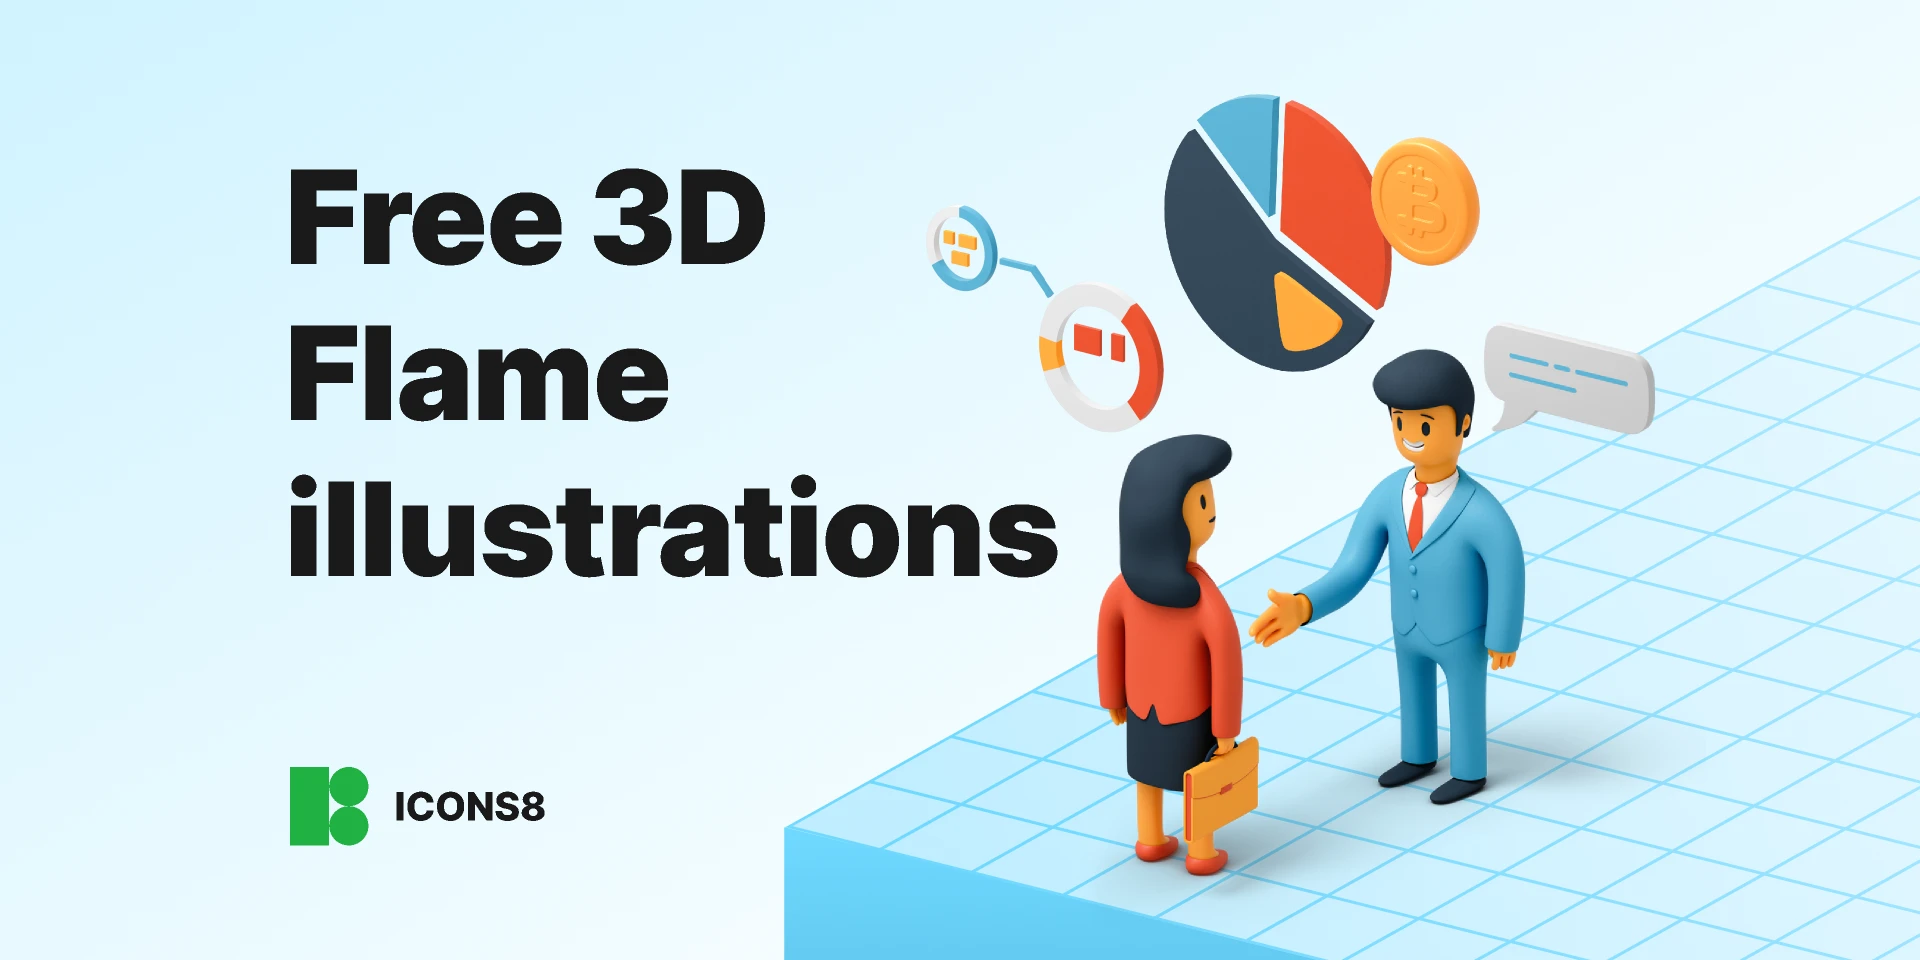 Free 3D Flame illustrations by Icons8 for Figma and Adobe XD